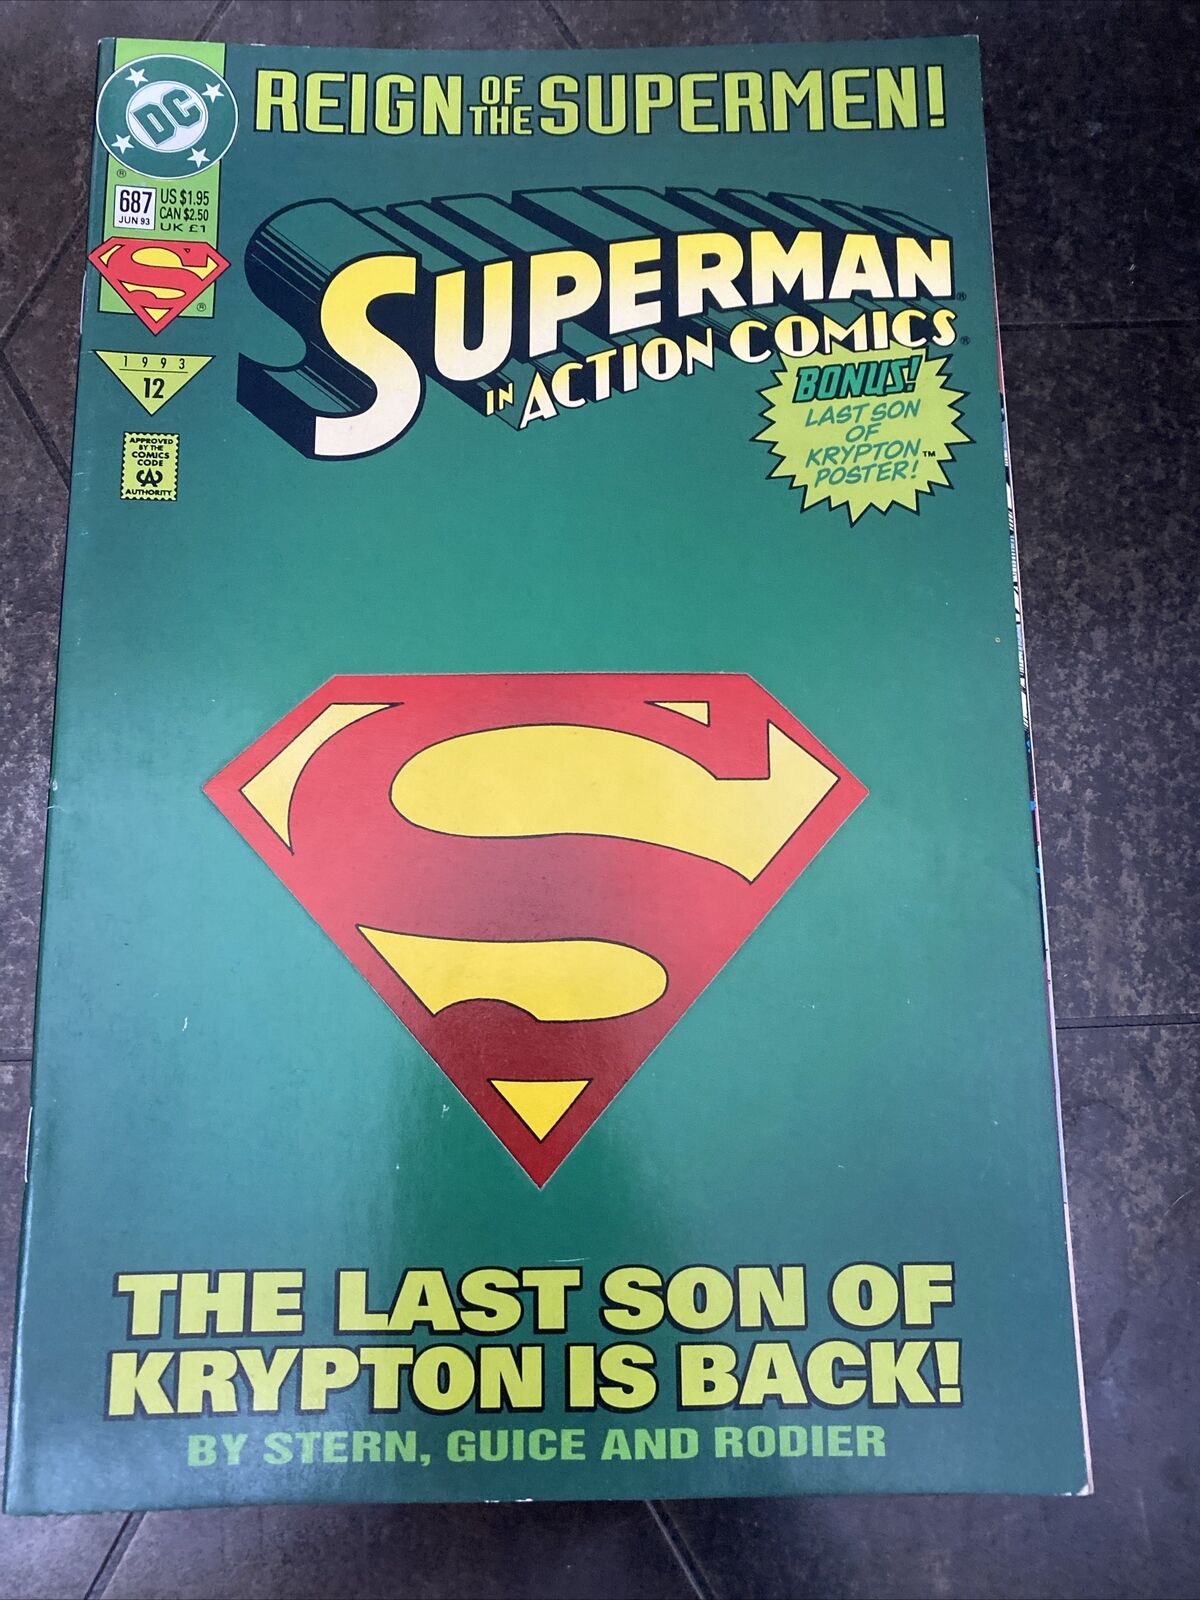 SUPERMAN in ACTION COMICS Issue 687 REIGN OF THE SUPERMEN #12 DC Comic Book 1993